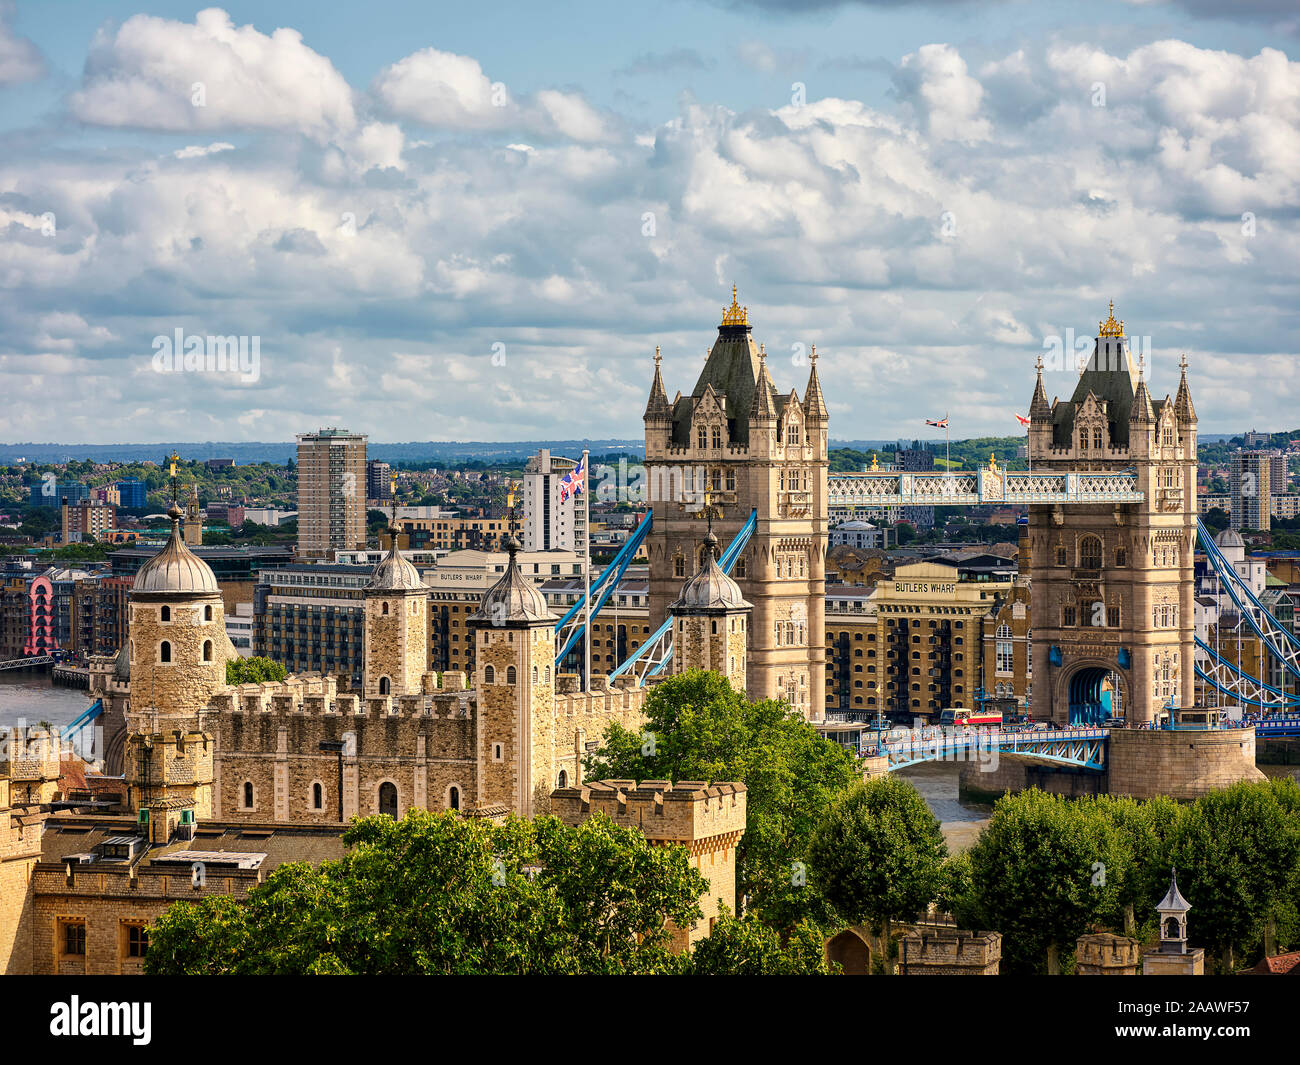 High angle view of Tower Bridge with cityscape in background against cloudy sky at London Stock Photo